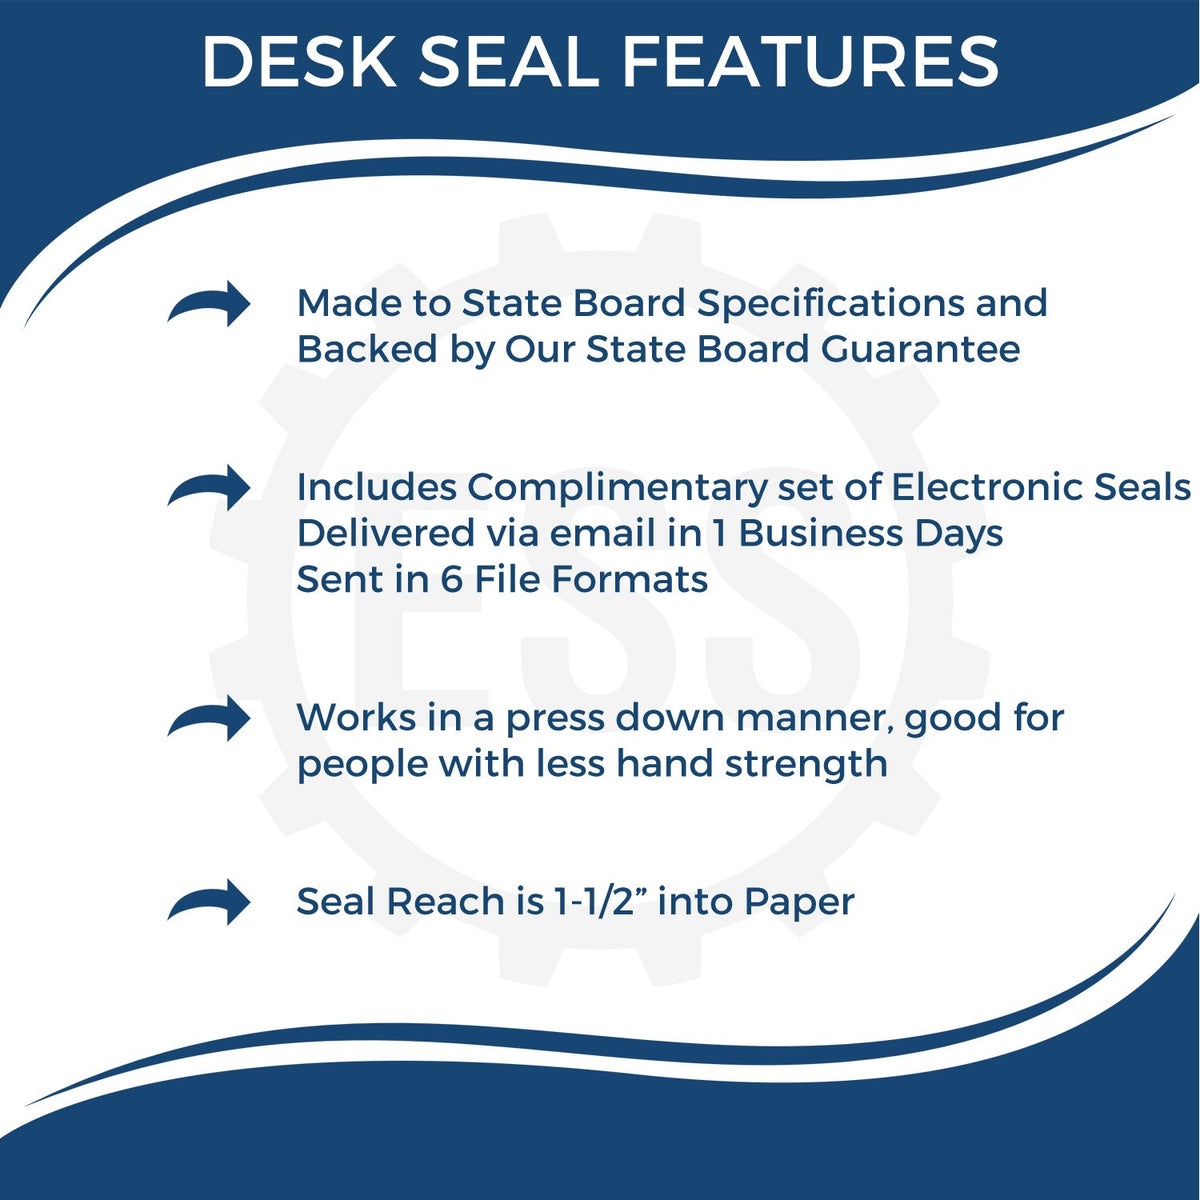 A picture of an infographic highlighting the selling points for the North Dakota Desk Architect Embossing Seal